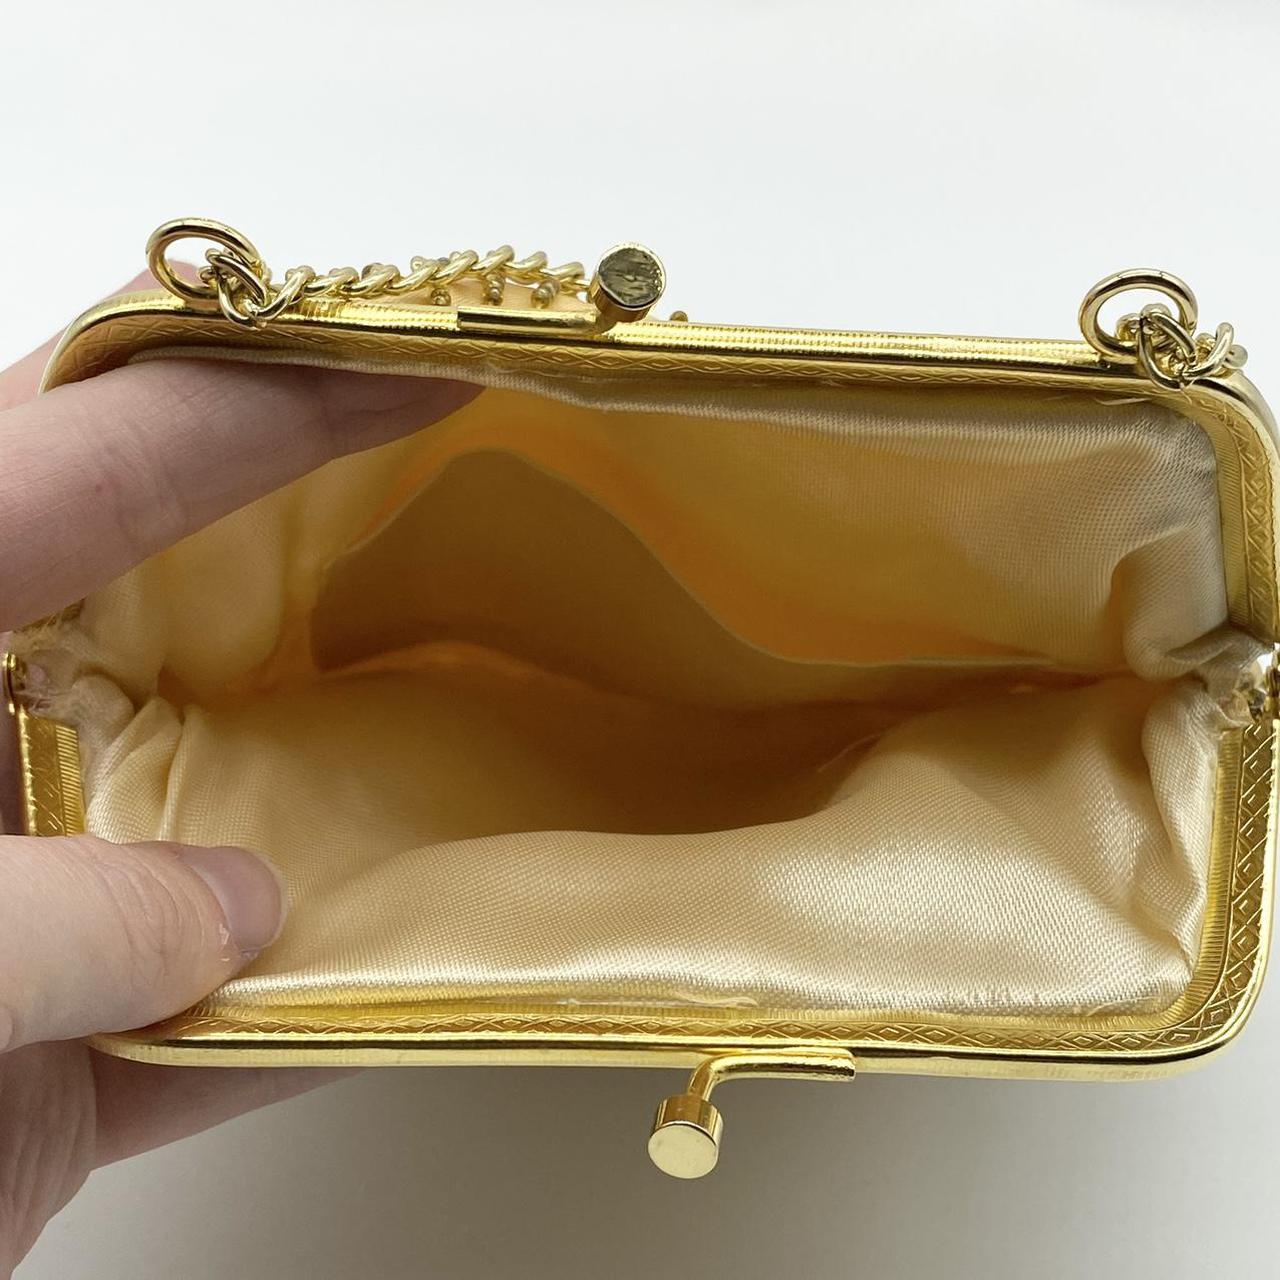 Product Image 3 - Beautiful little evening bag from